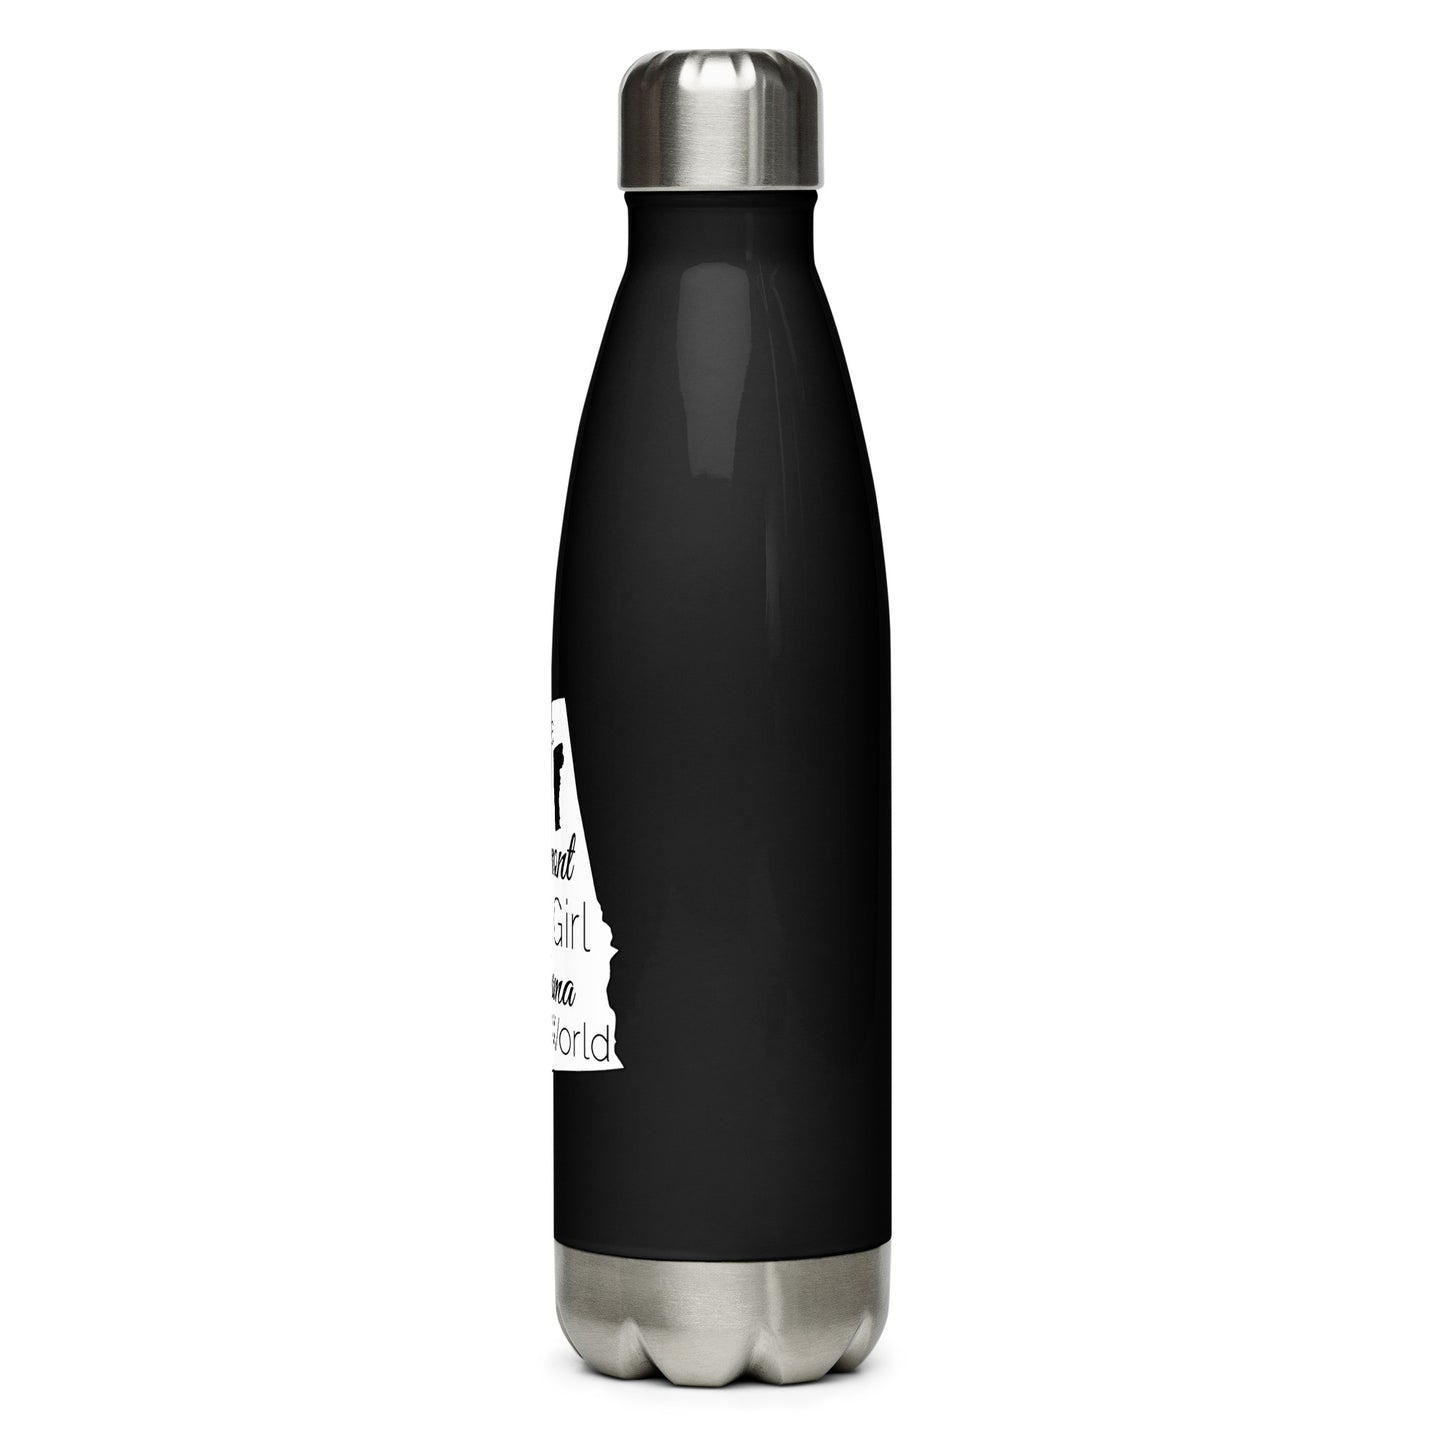 Just a Vermont Girl in an Alabama World Stainless Steel Water Bottle